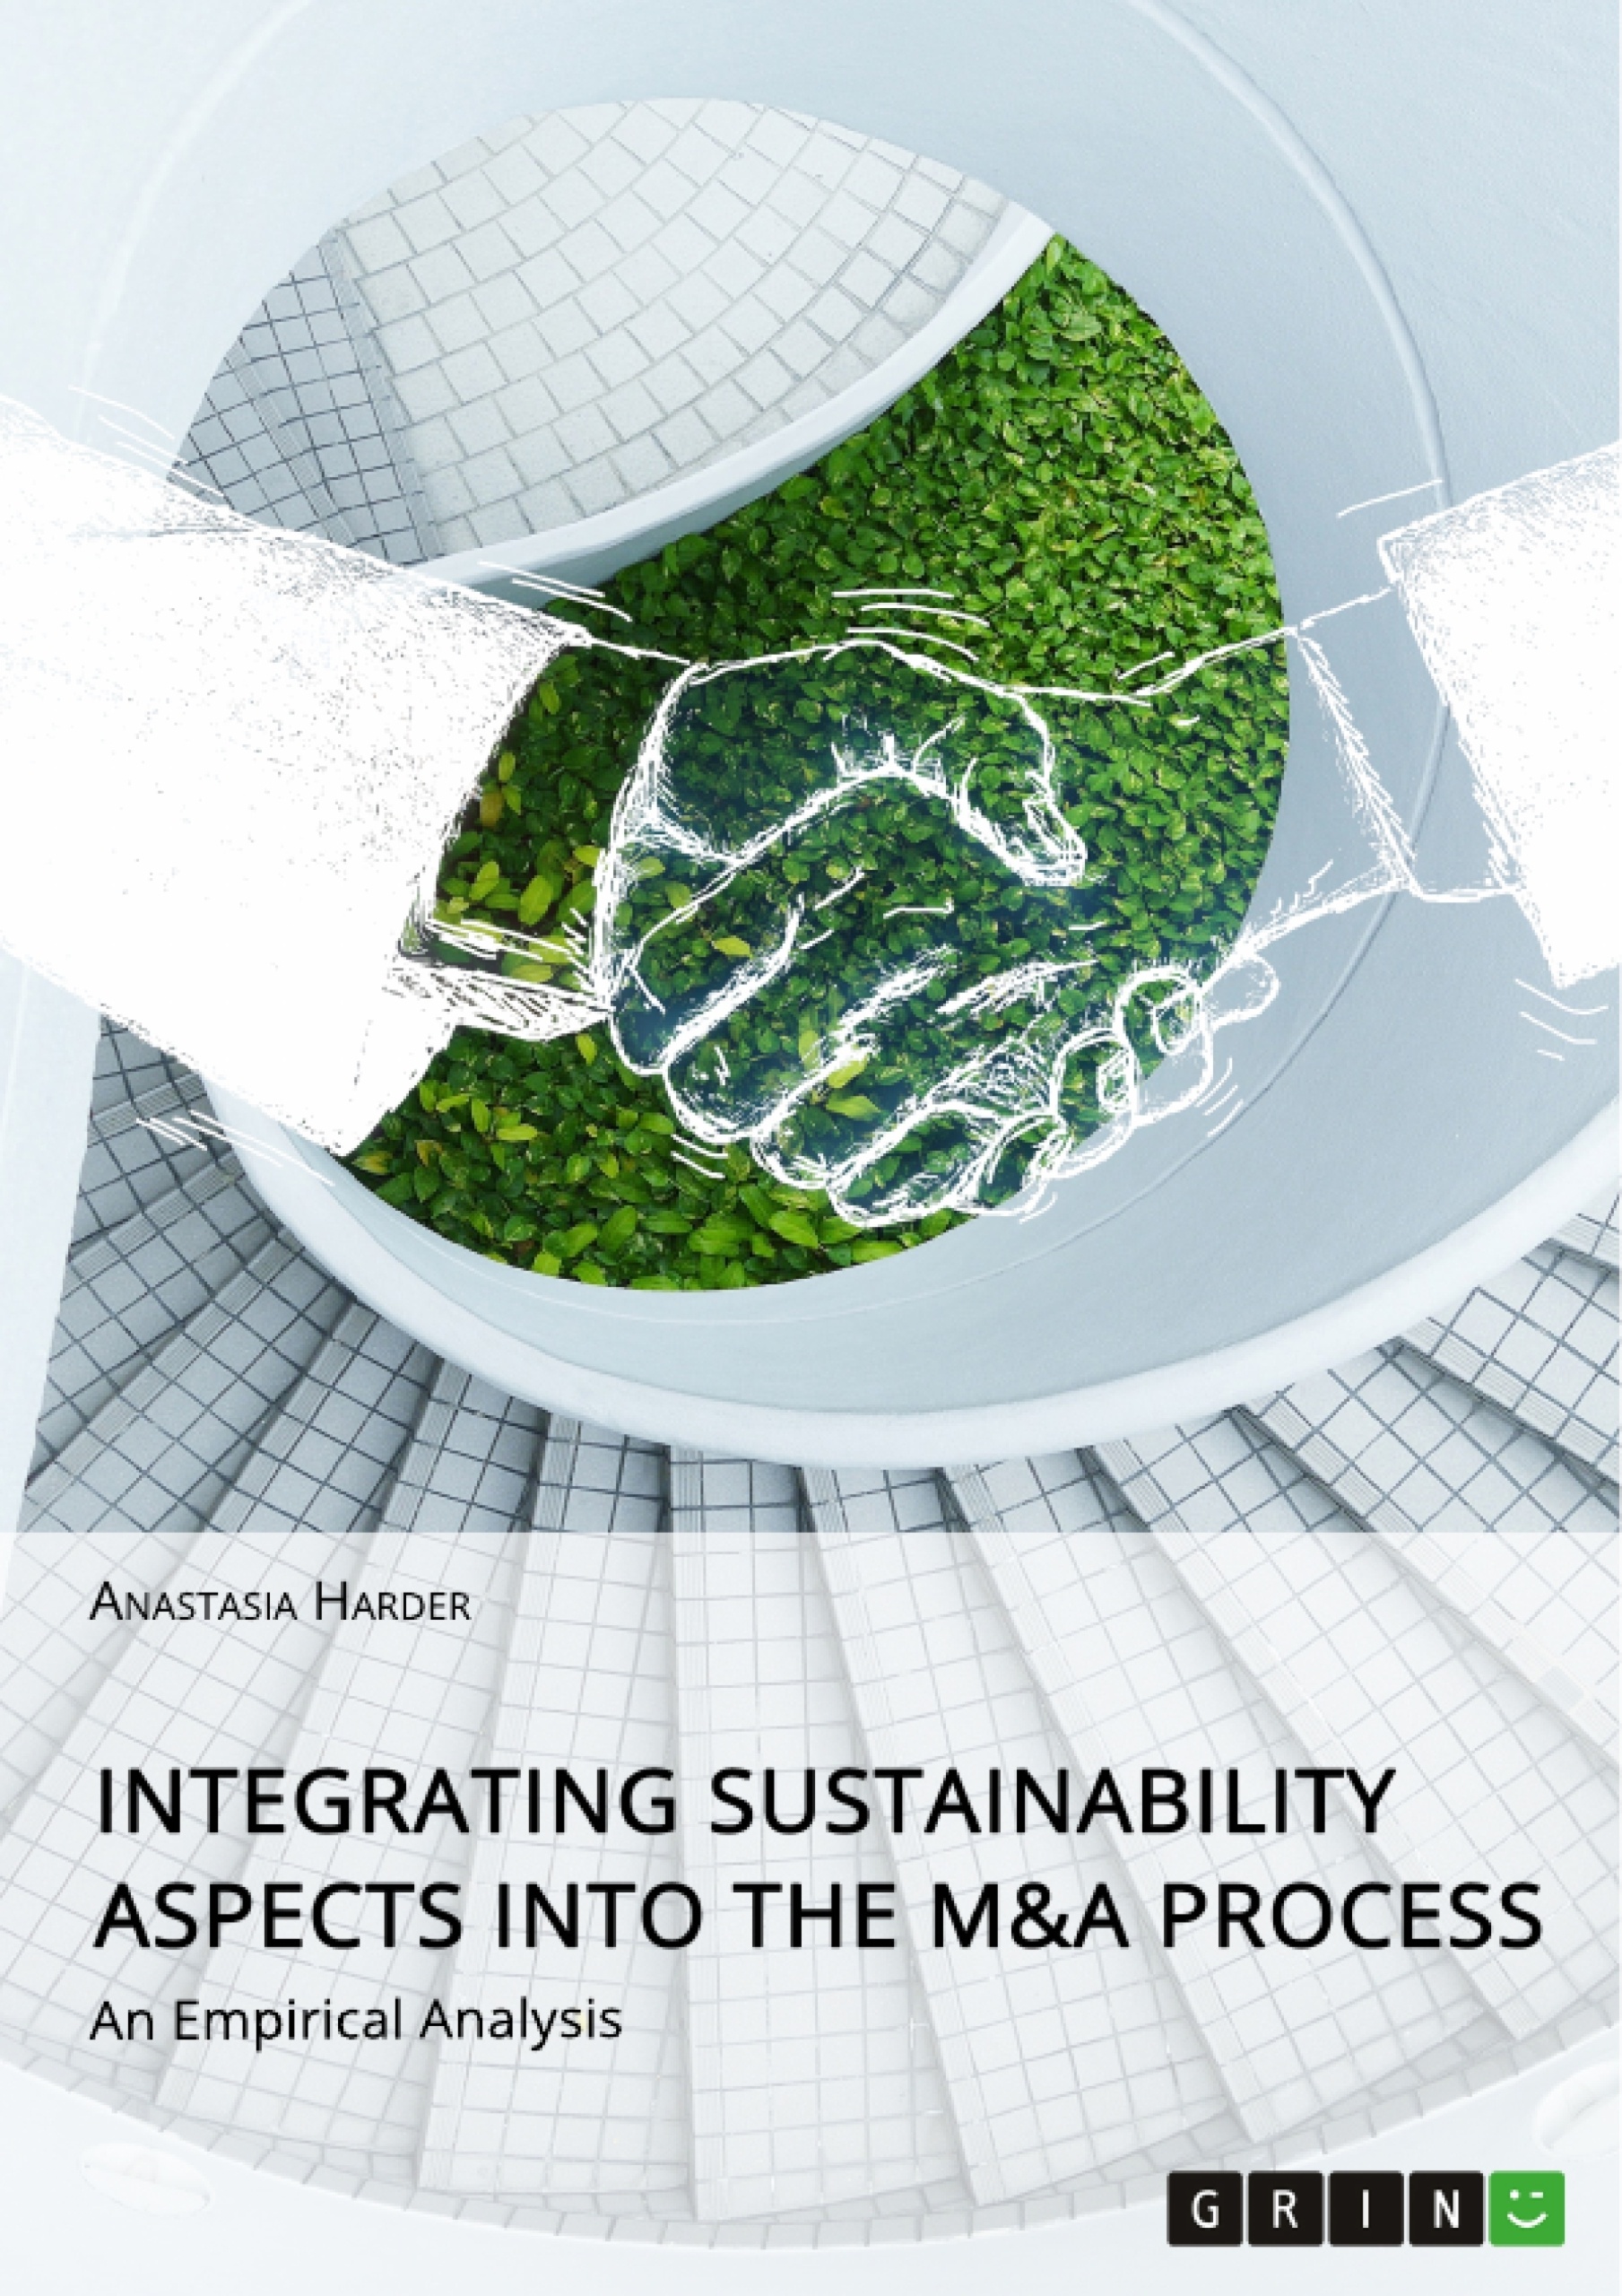 Aspects　Integrating　Process　into　MA　the　Sustainability　GRIN